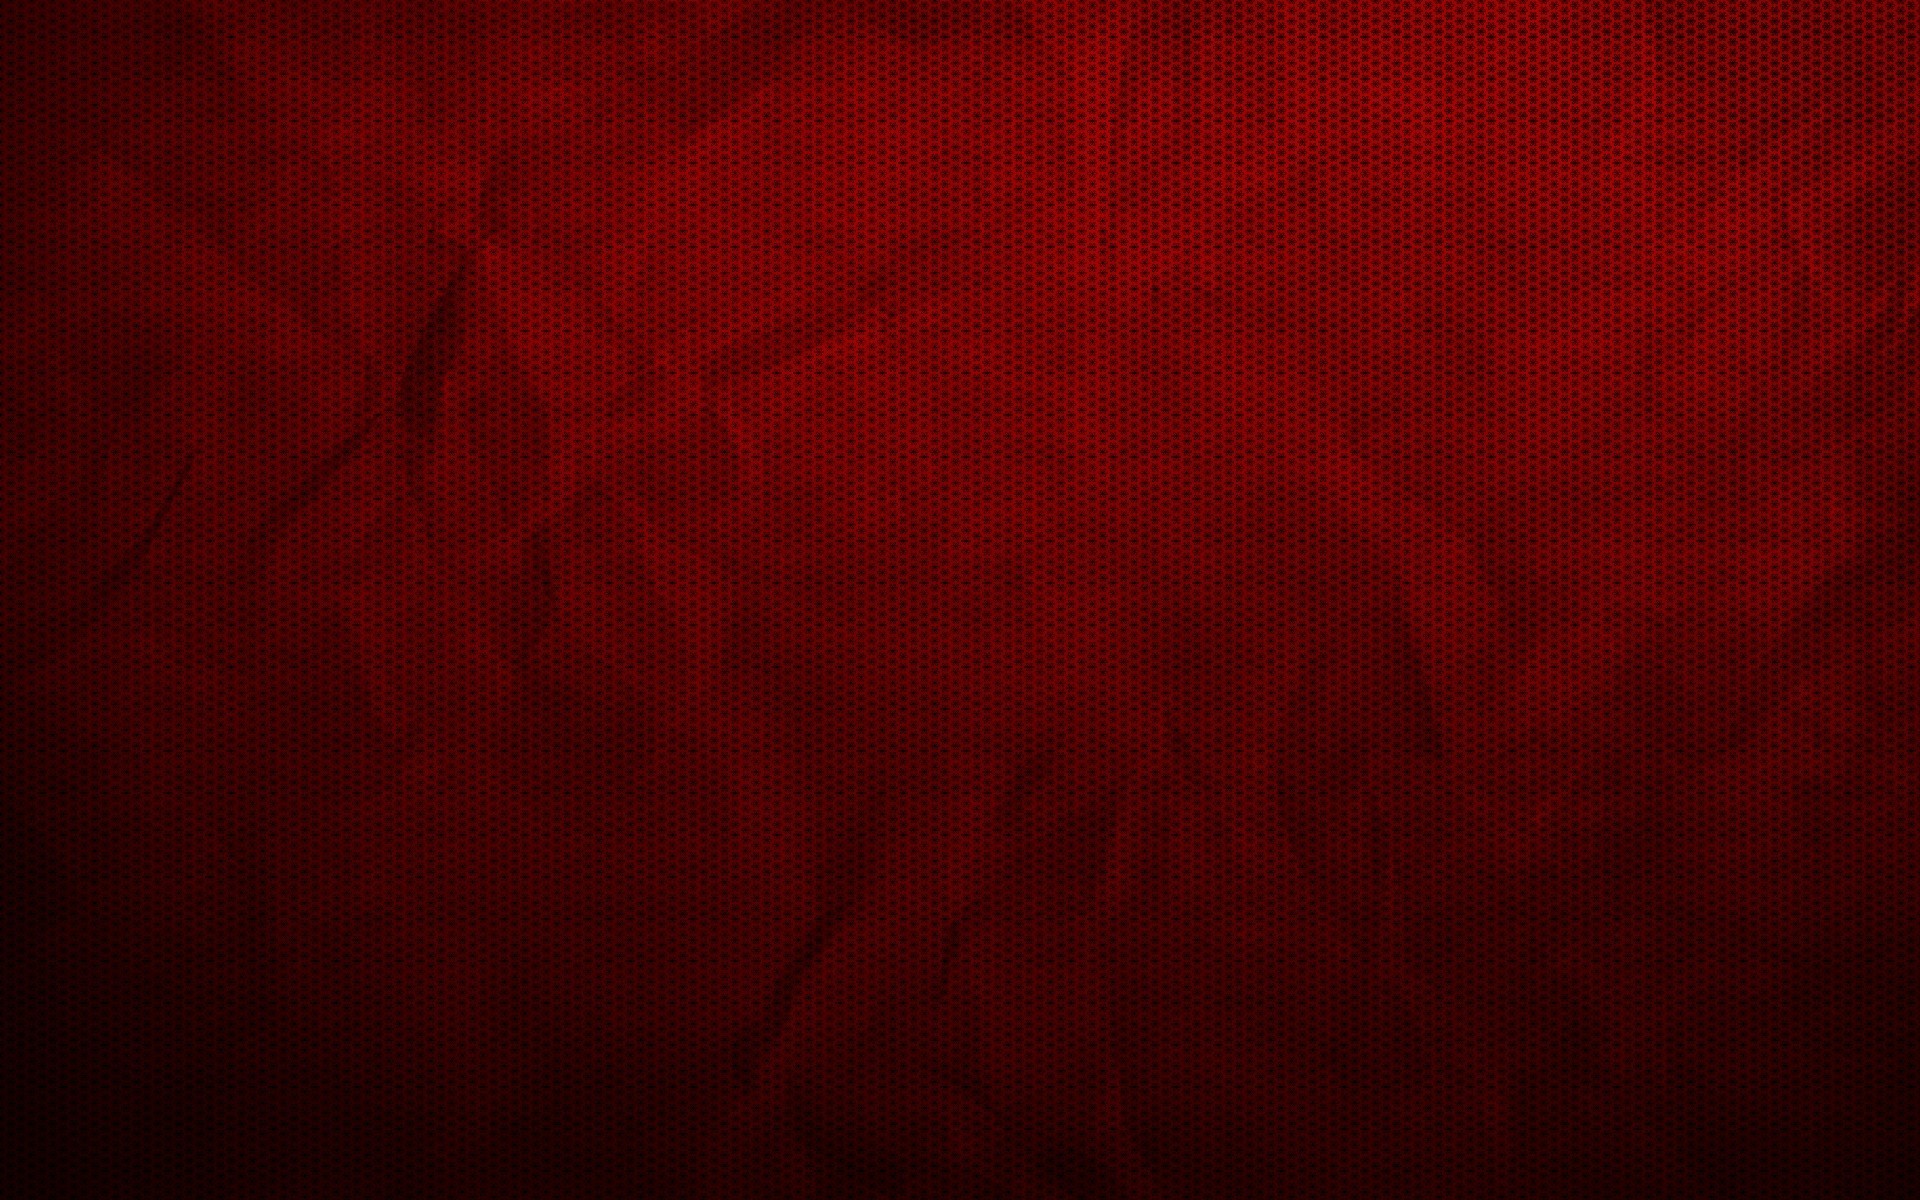 Marun dark red color plain background hd wallpapers gallery Black